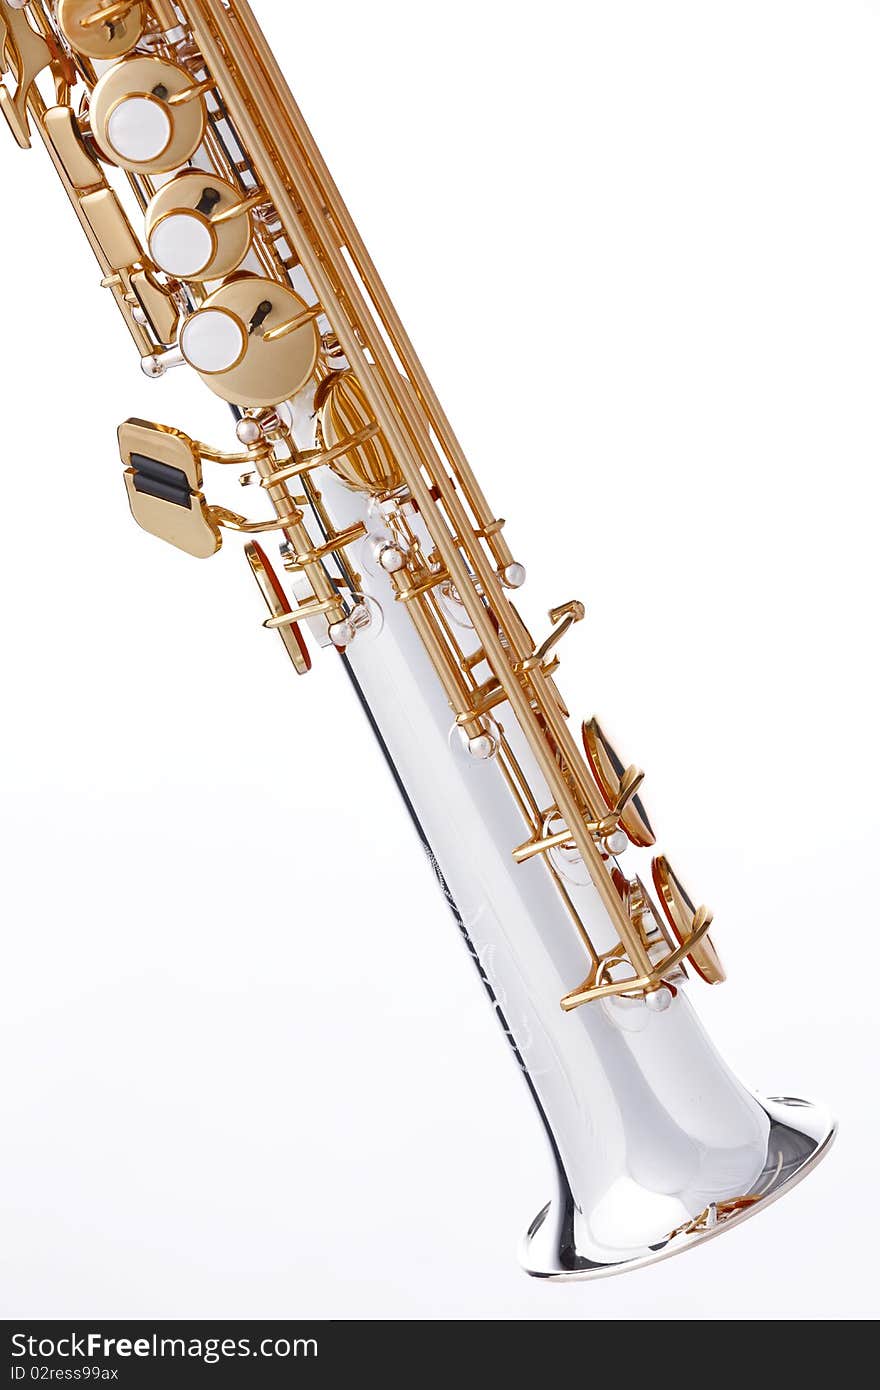 A professional soprano saxophone isolated against a white background in the vertical format. A professional soprano saxophone isolated against a white background in the vertical format.